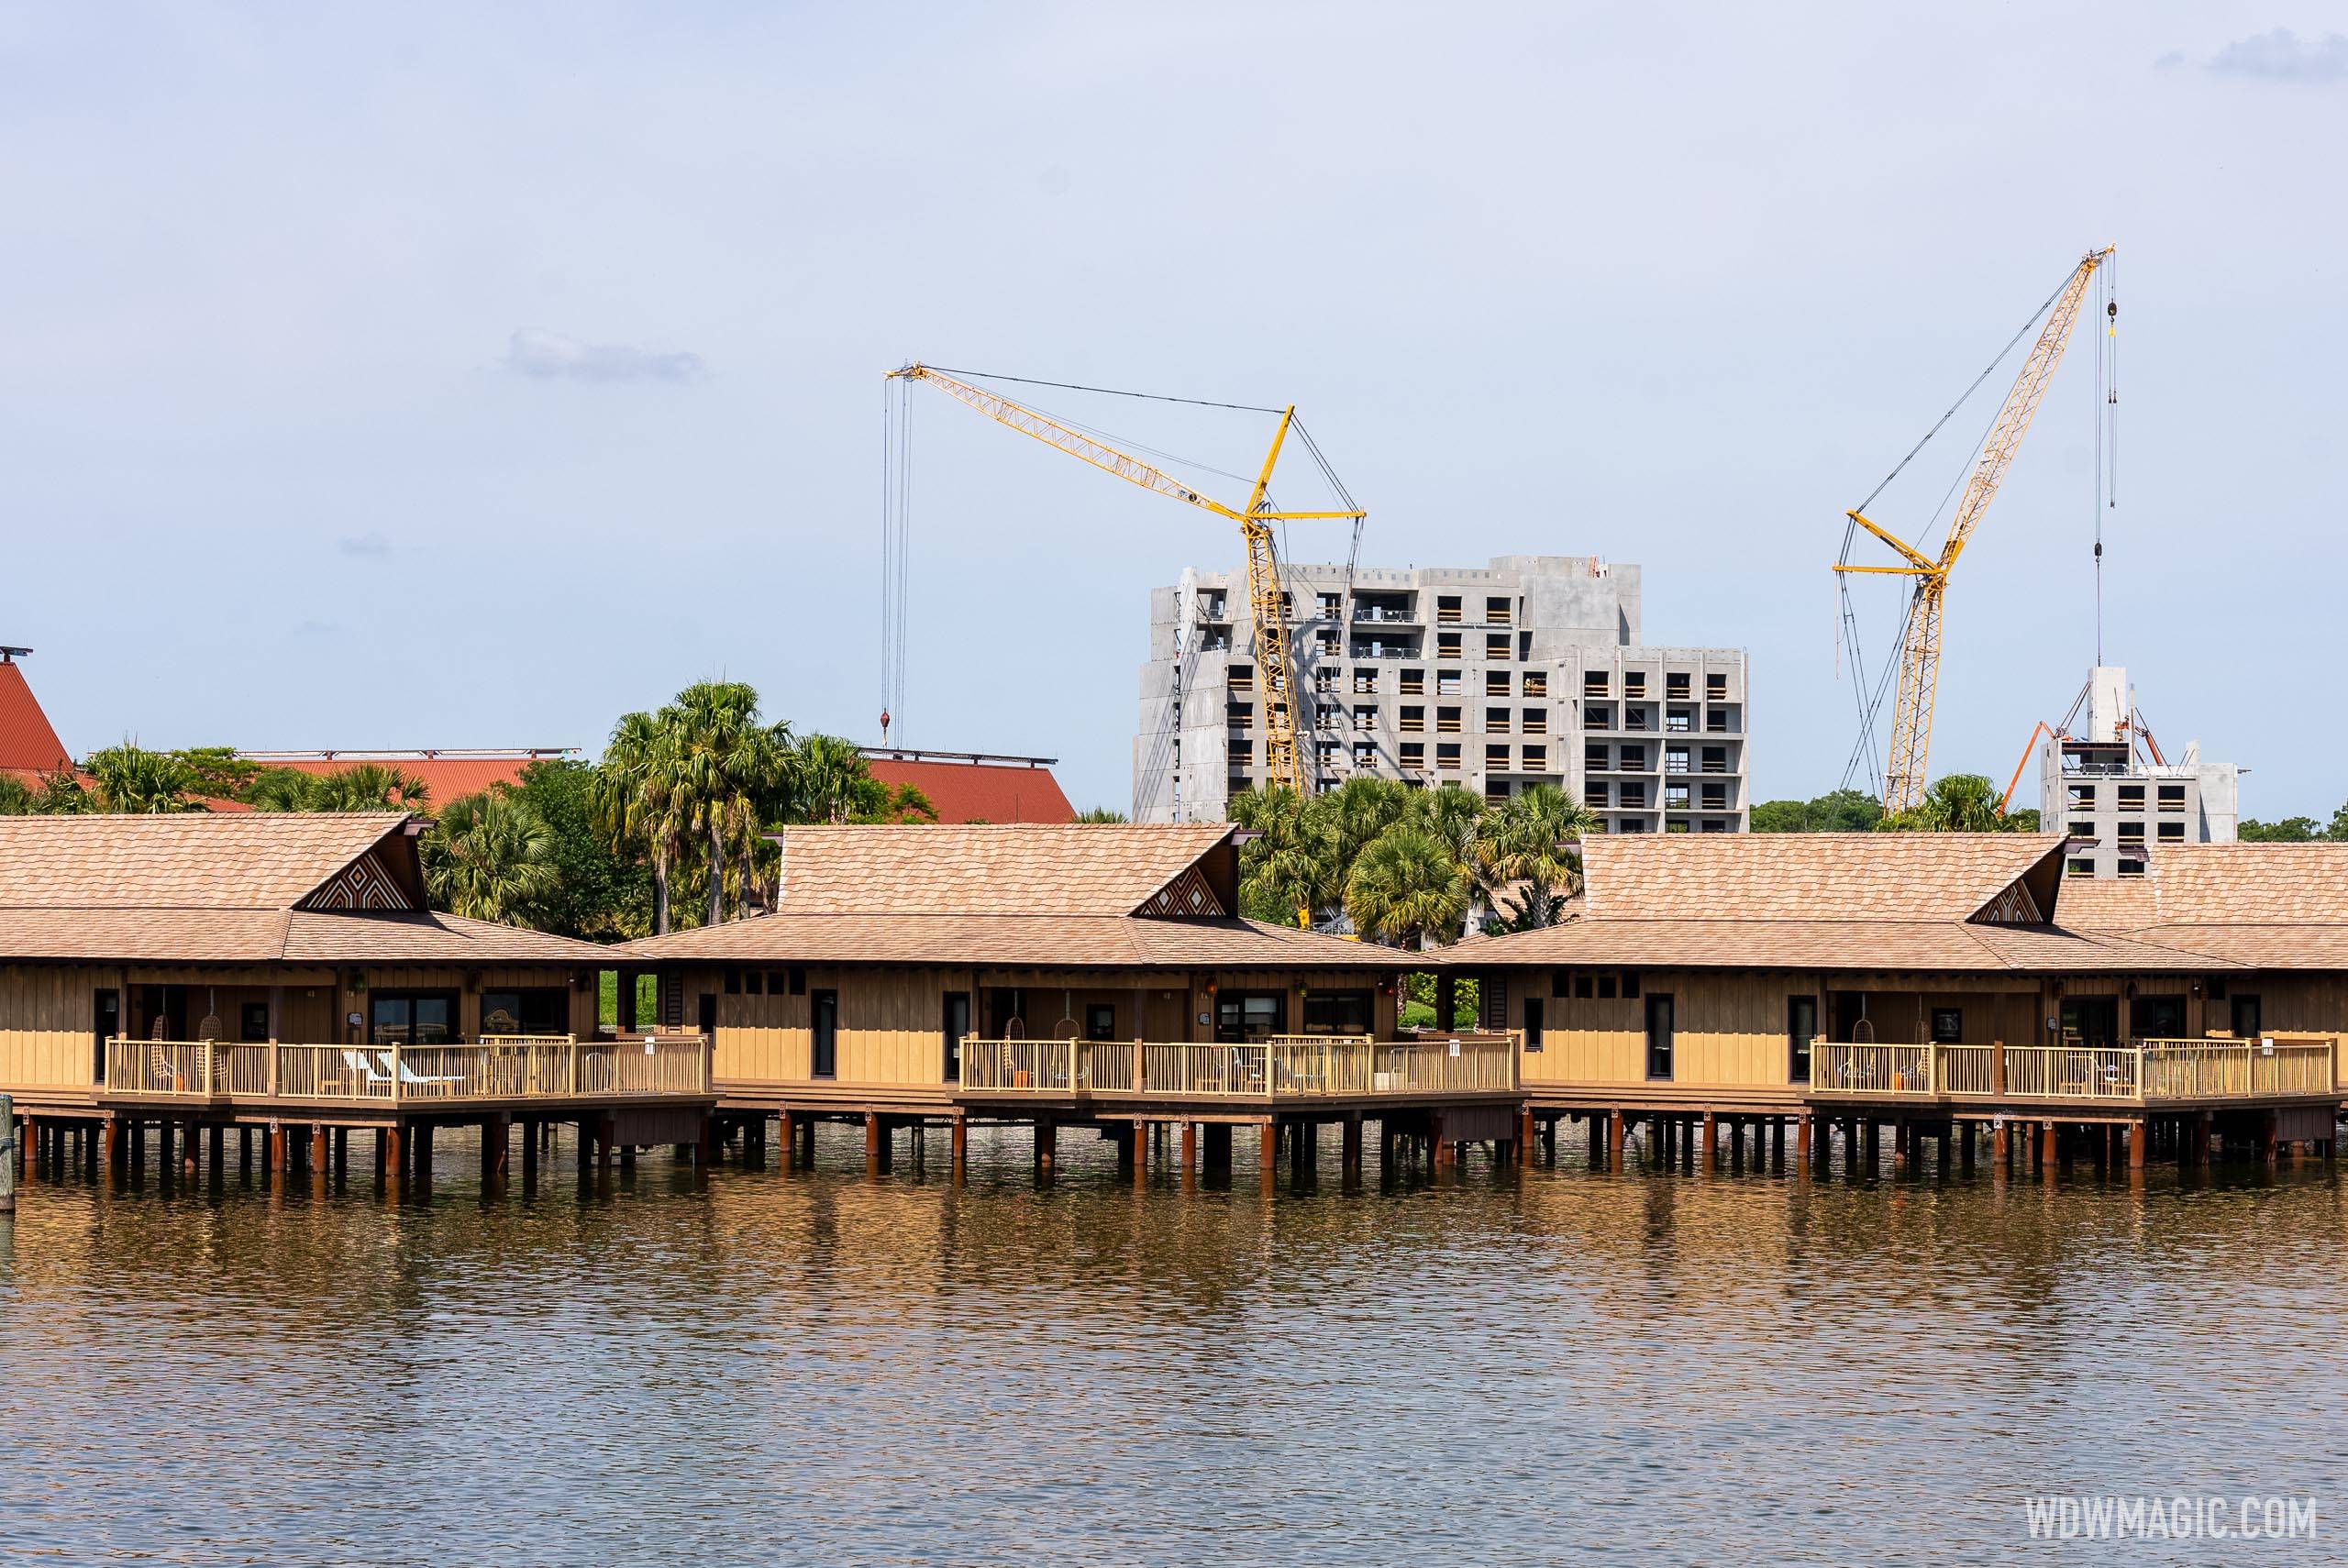 Latest look at the new Disney Vacation Club tower construction site at Disney's Polynesian Village Resort